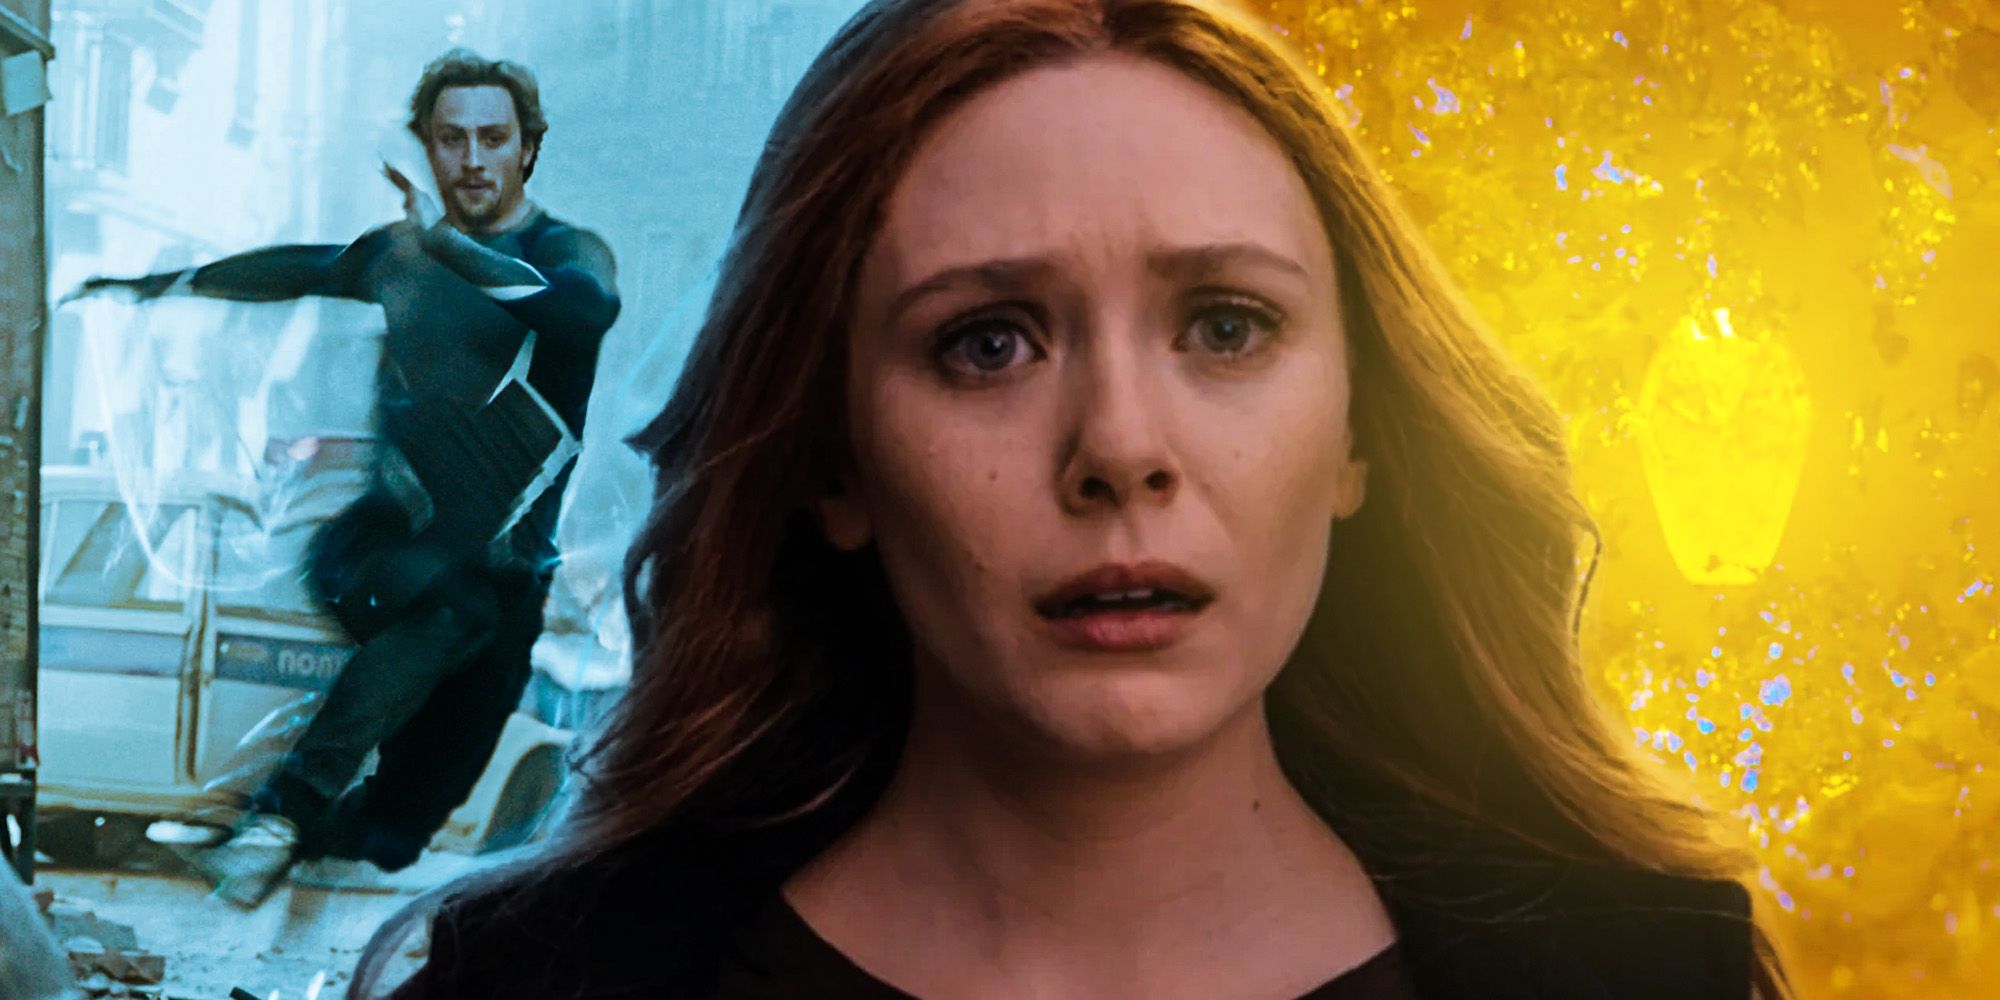 Major MCU Scarlet Witch & Quicksilver Origin Mystery Is Solved By Excellent X-Men Villain Theory